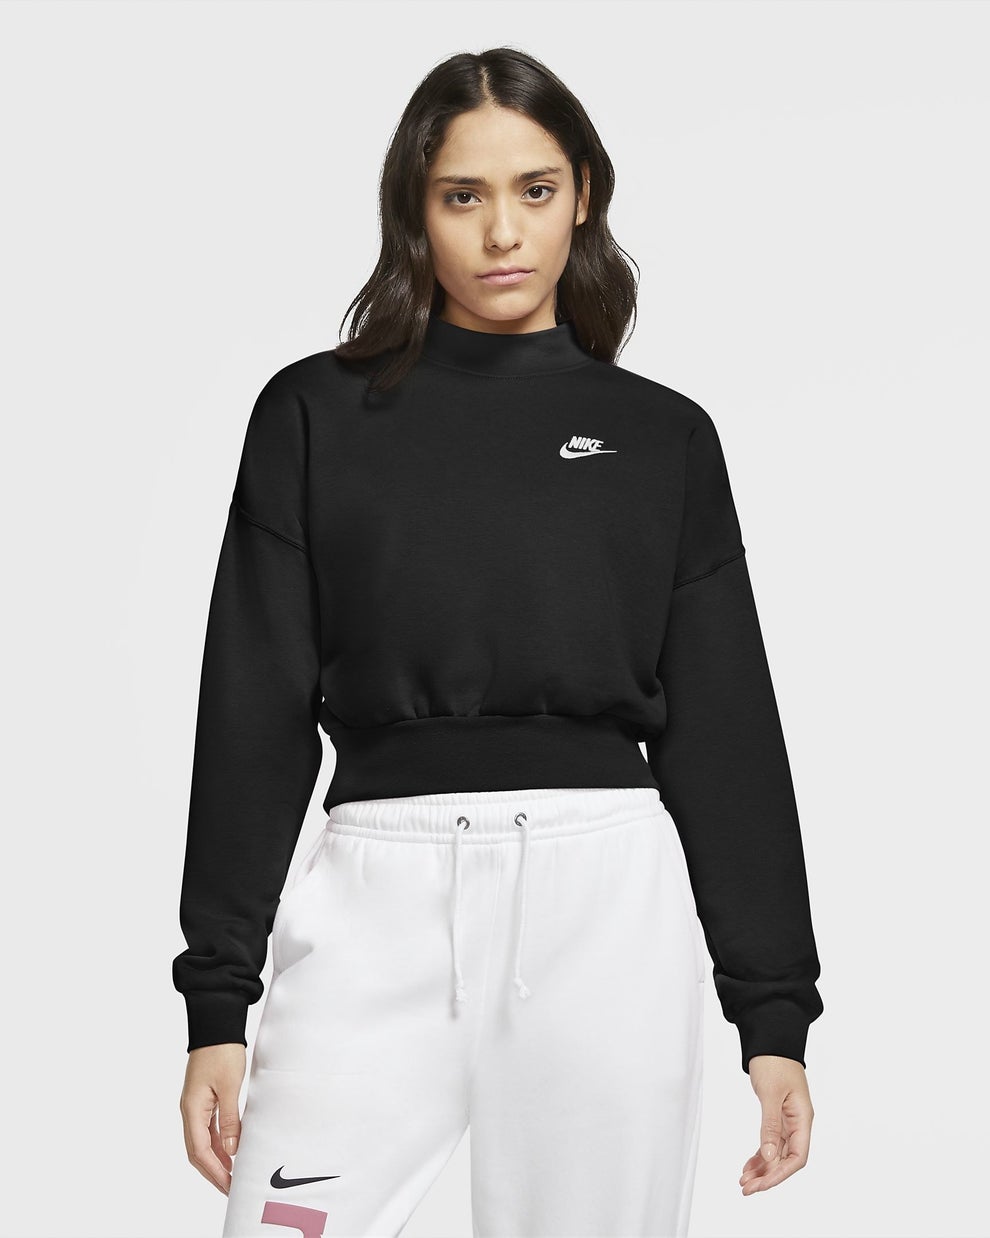 21 Things From Nike That Are Chic *And* Comfortable